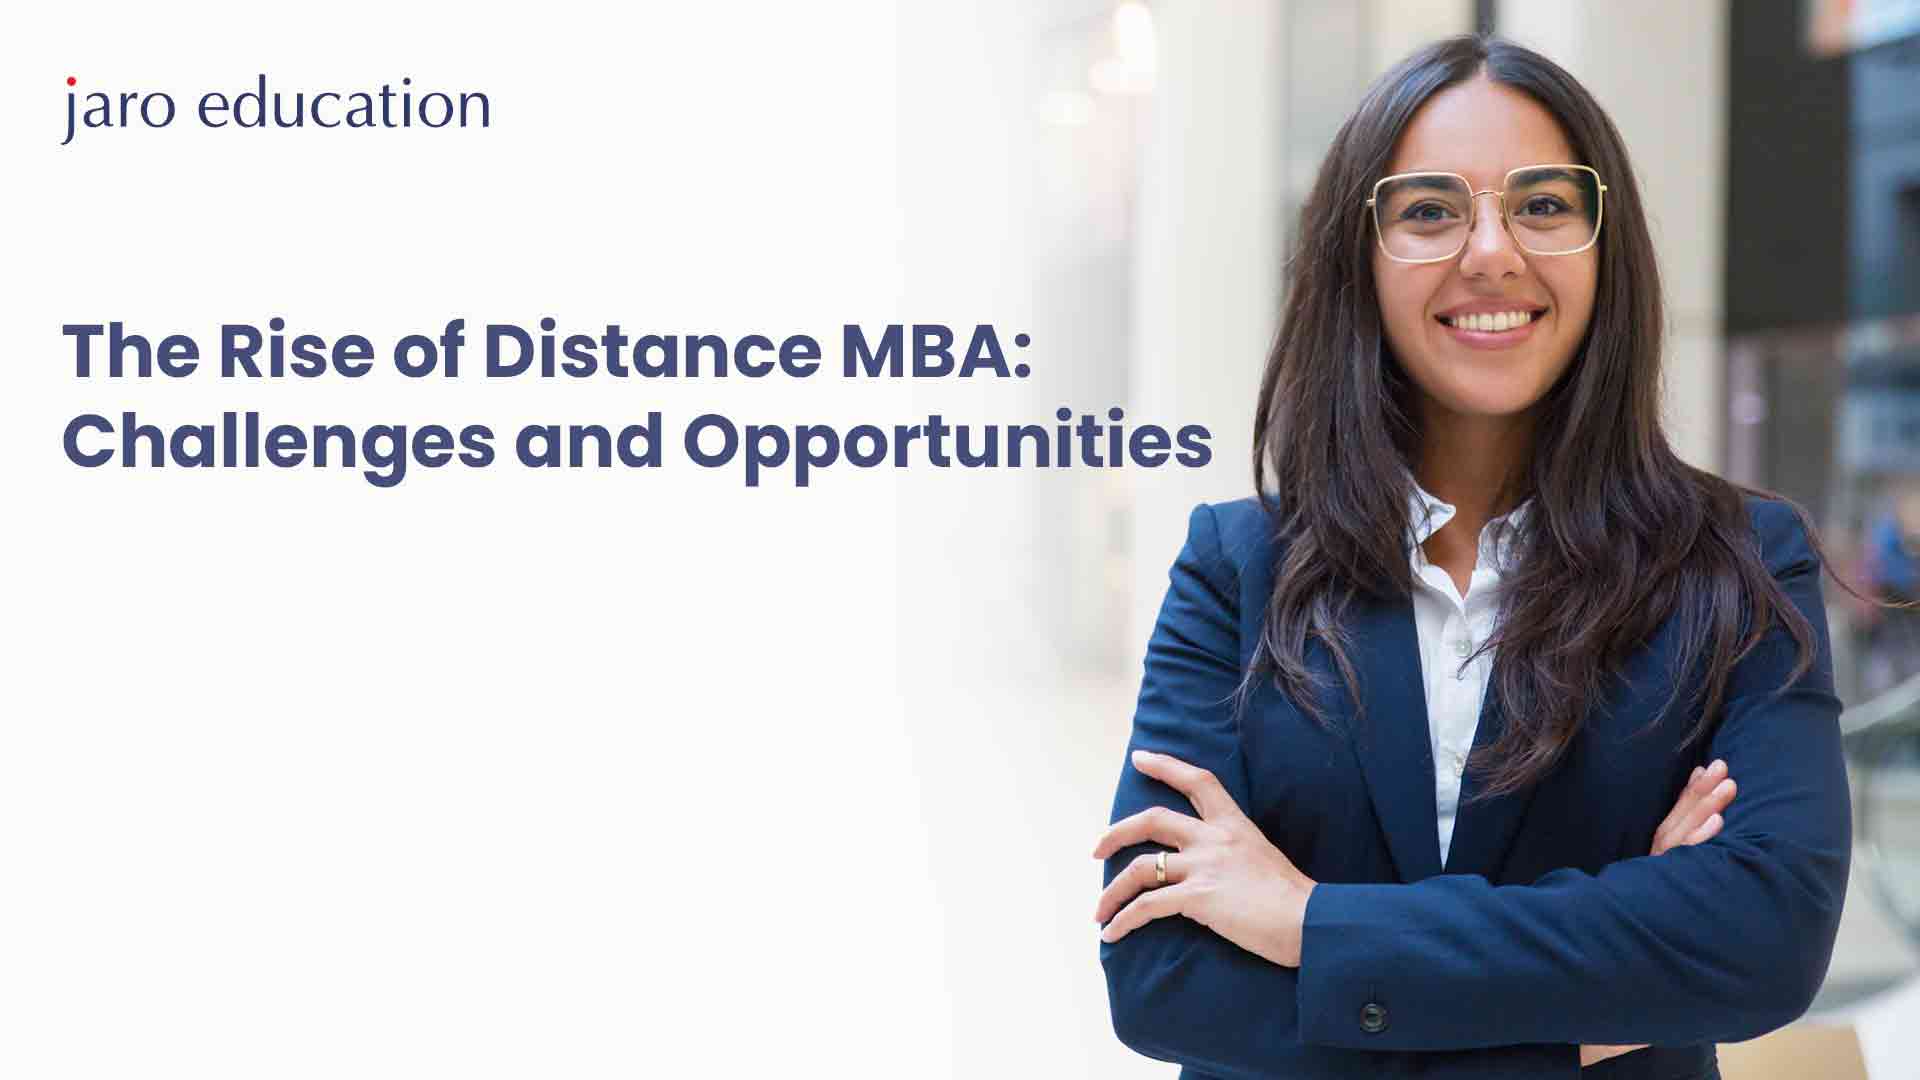 The Rise of Distance MBA Challenges and Opportunities